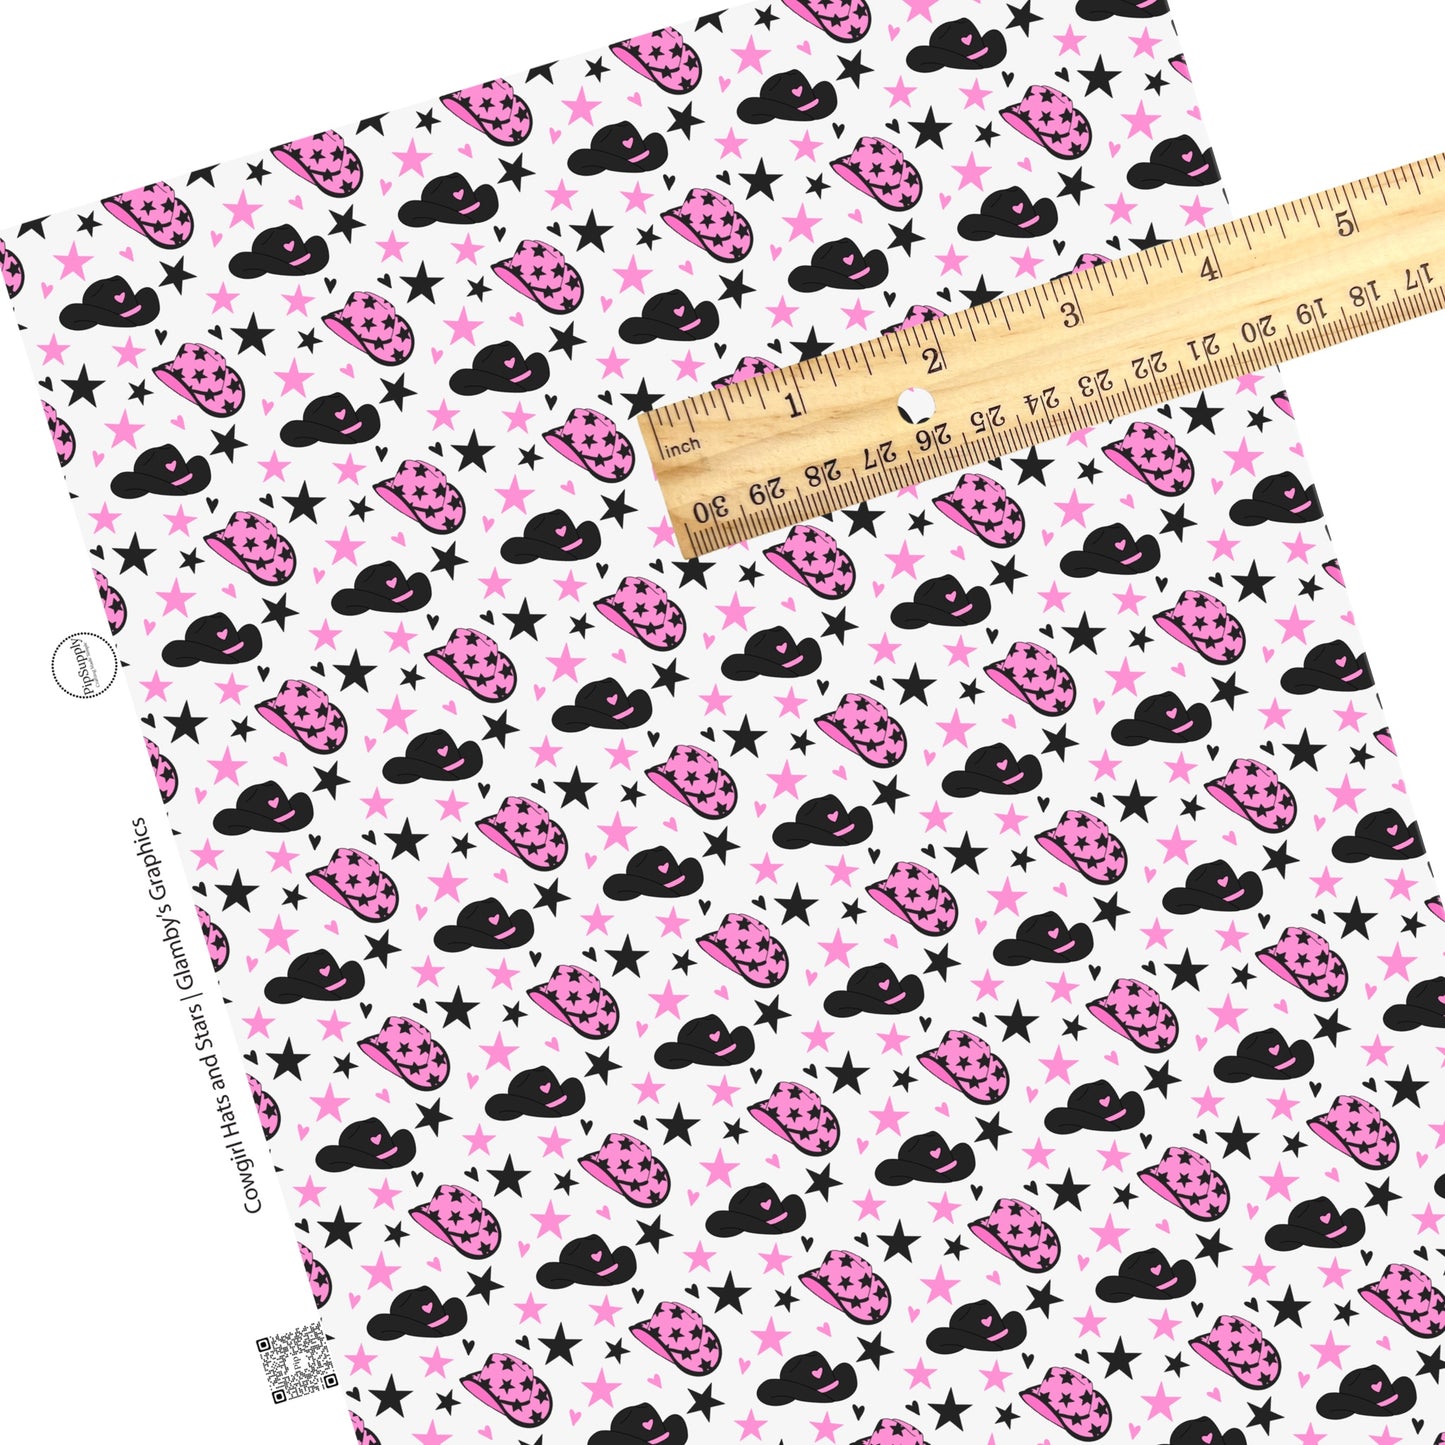 These farm pattern themed faux leather sheets contain the following design elements: pink and black cowgirl hats and stars. Our CPSIA compliant faux leather sheets or rolls can be used for all types of crafting projects.